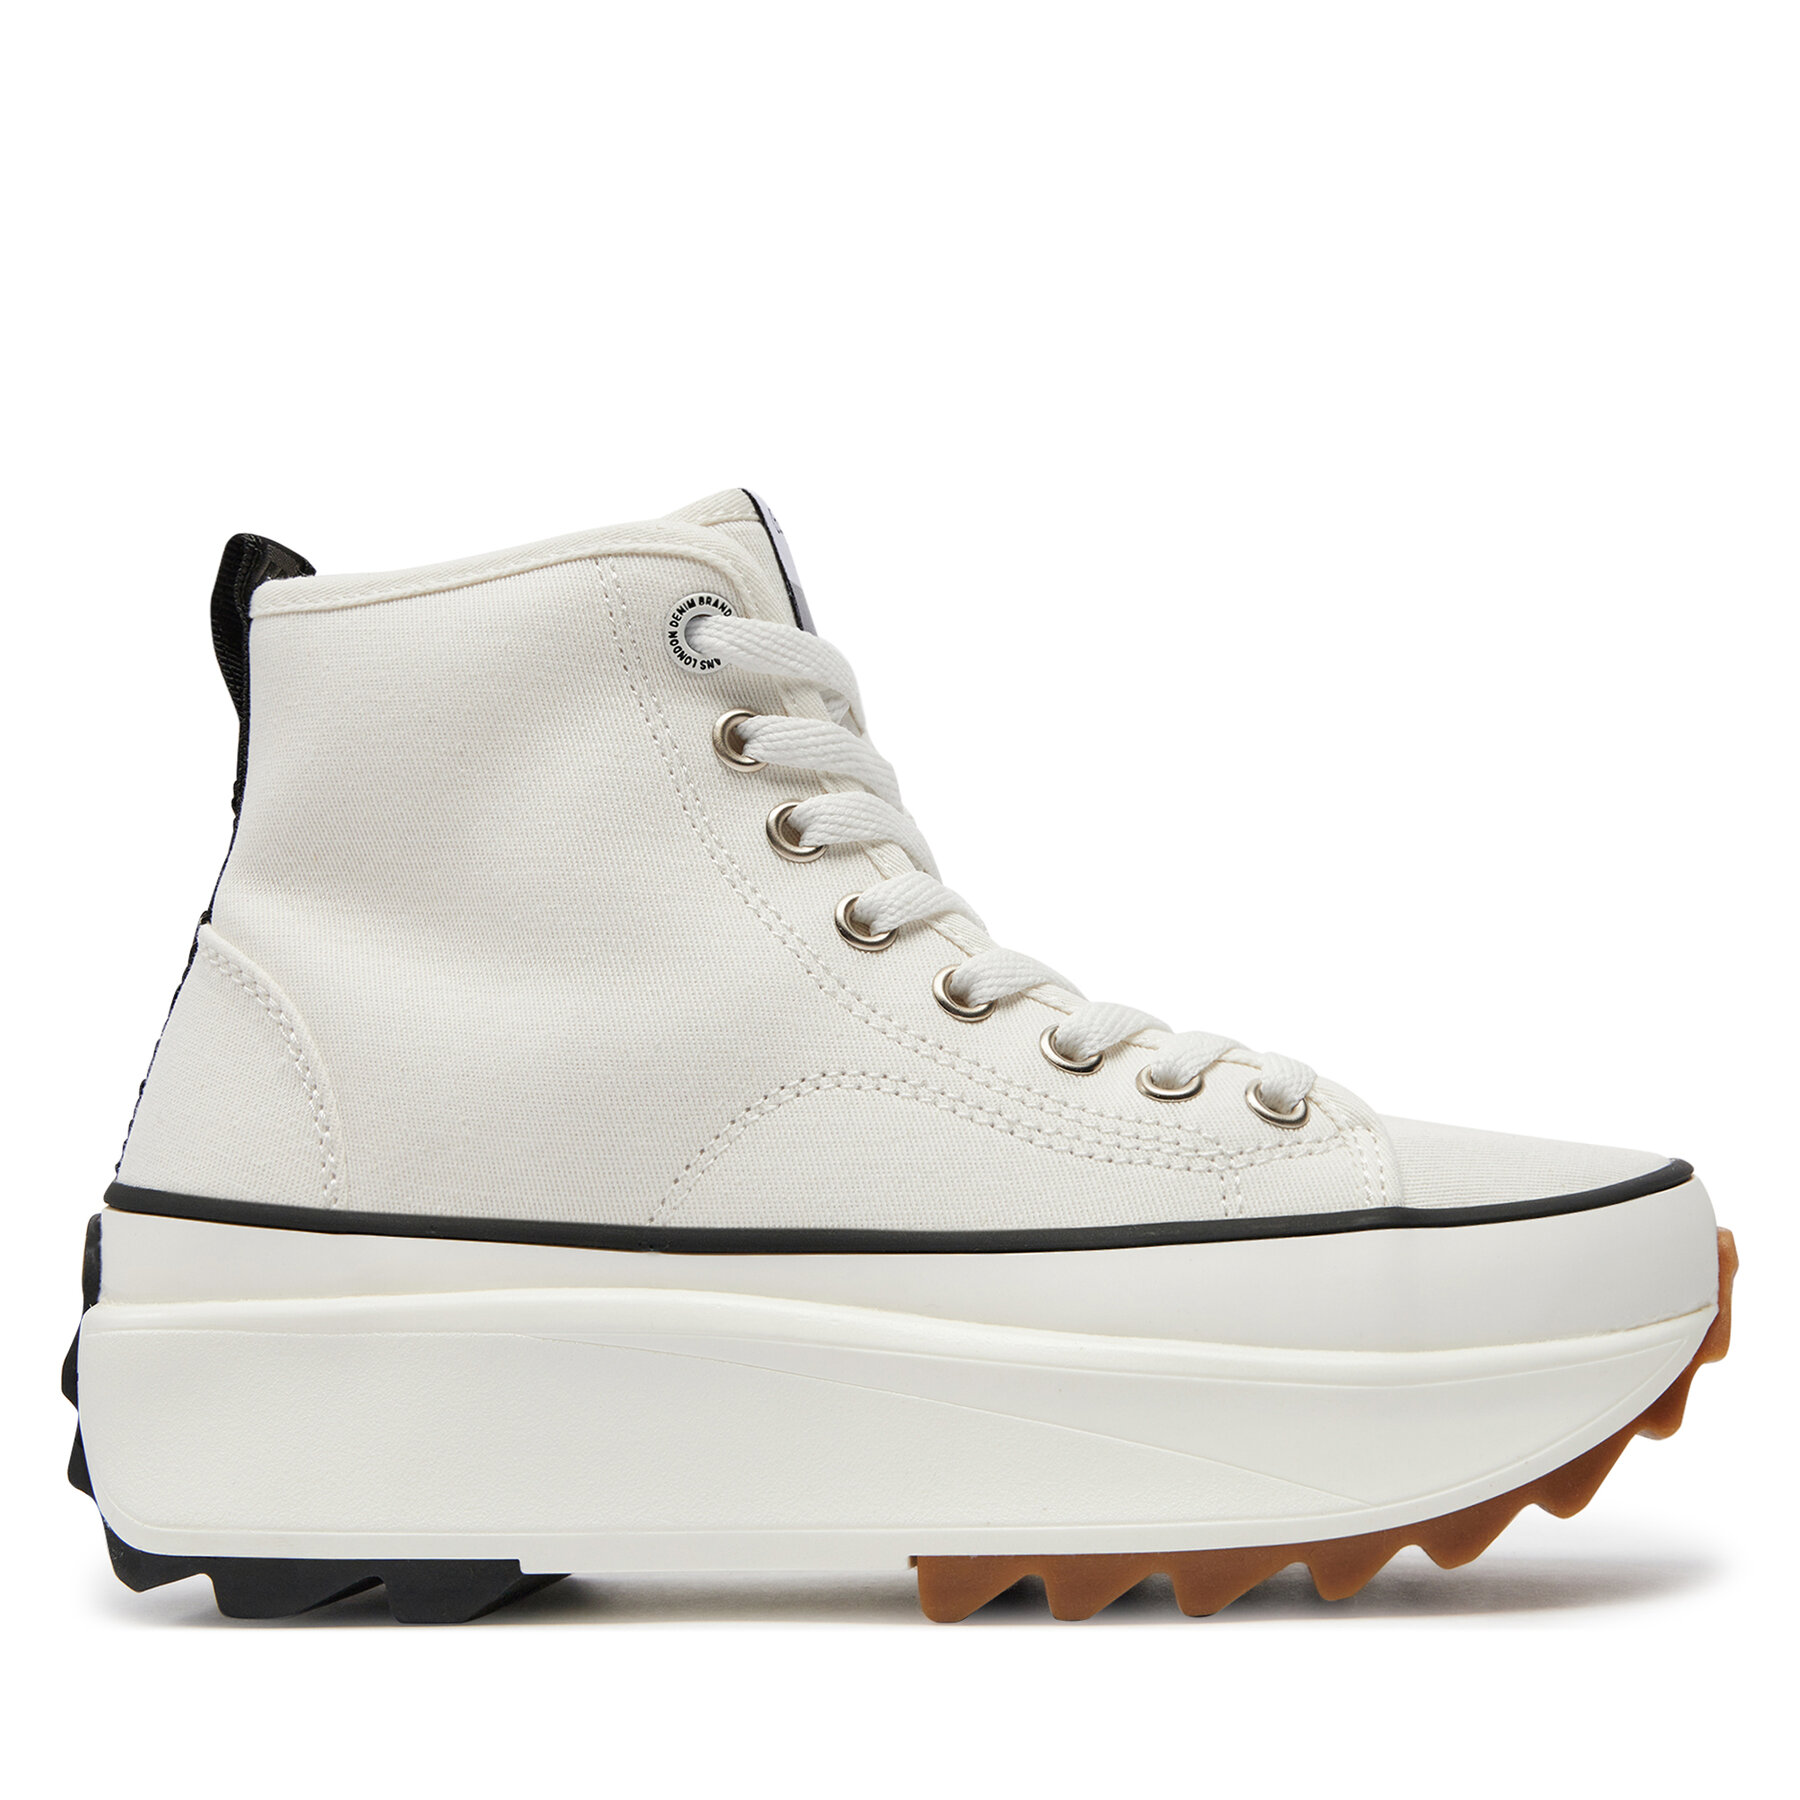 Sneakers Pepe Jeans PLS31520 White 800 von Pepe Jeans